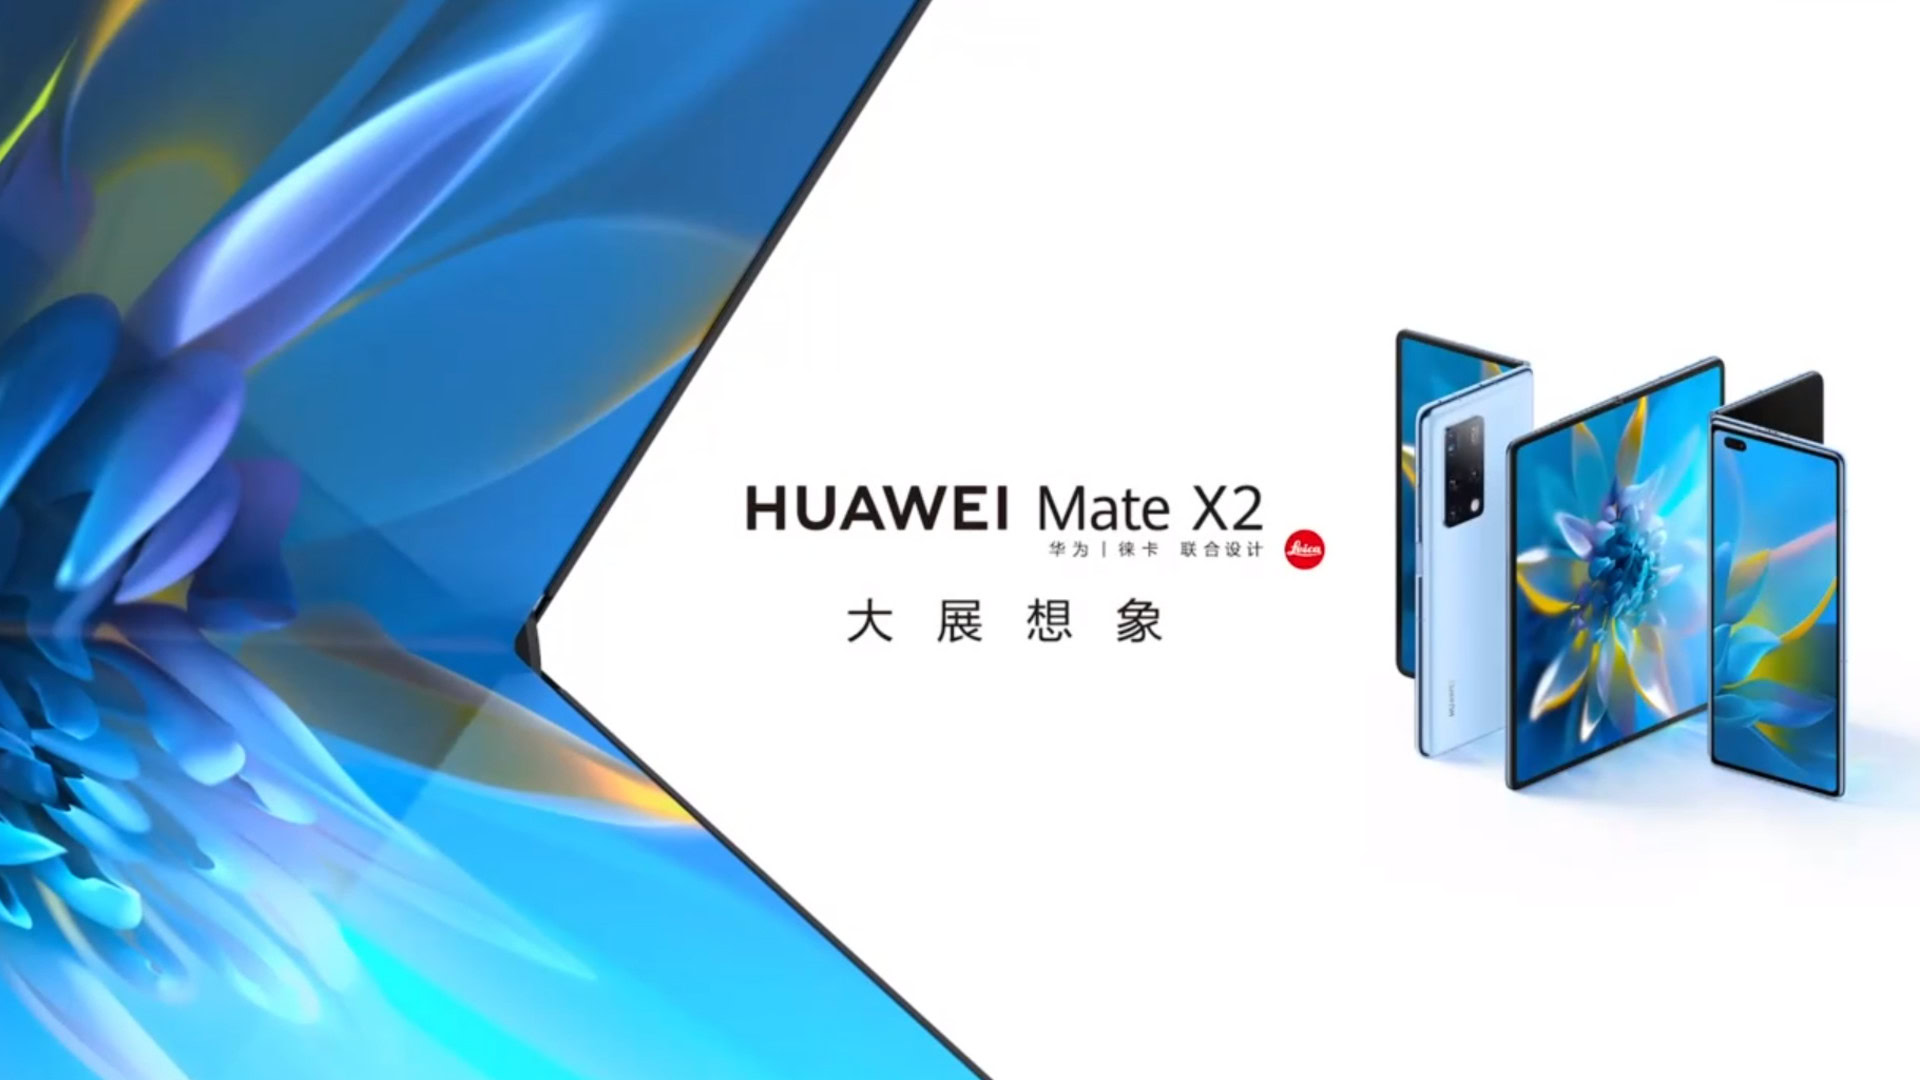 HUAWEI Mate X2 official